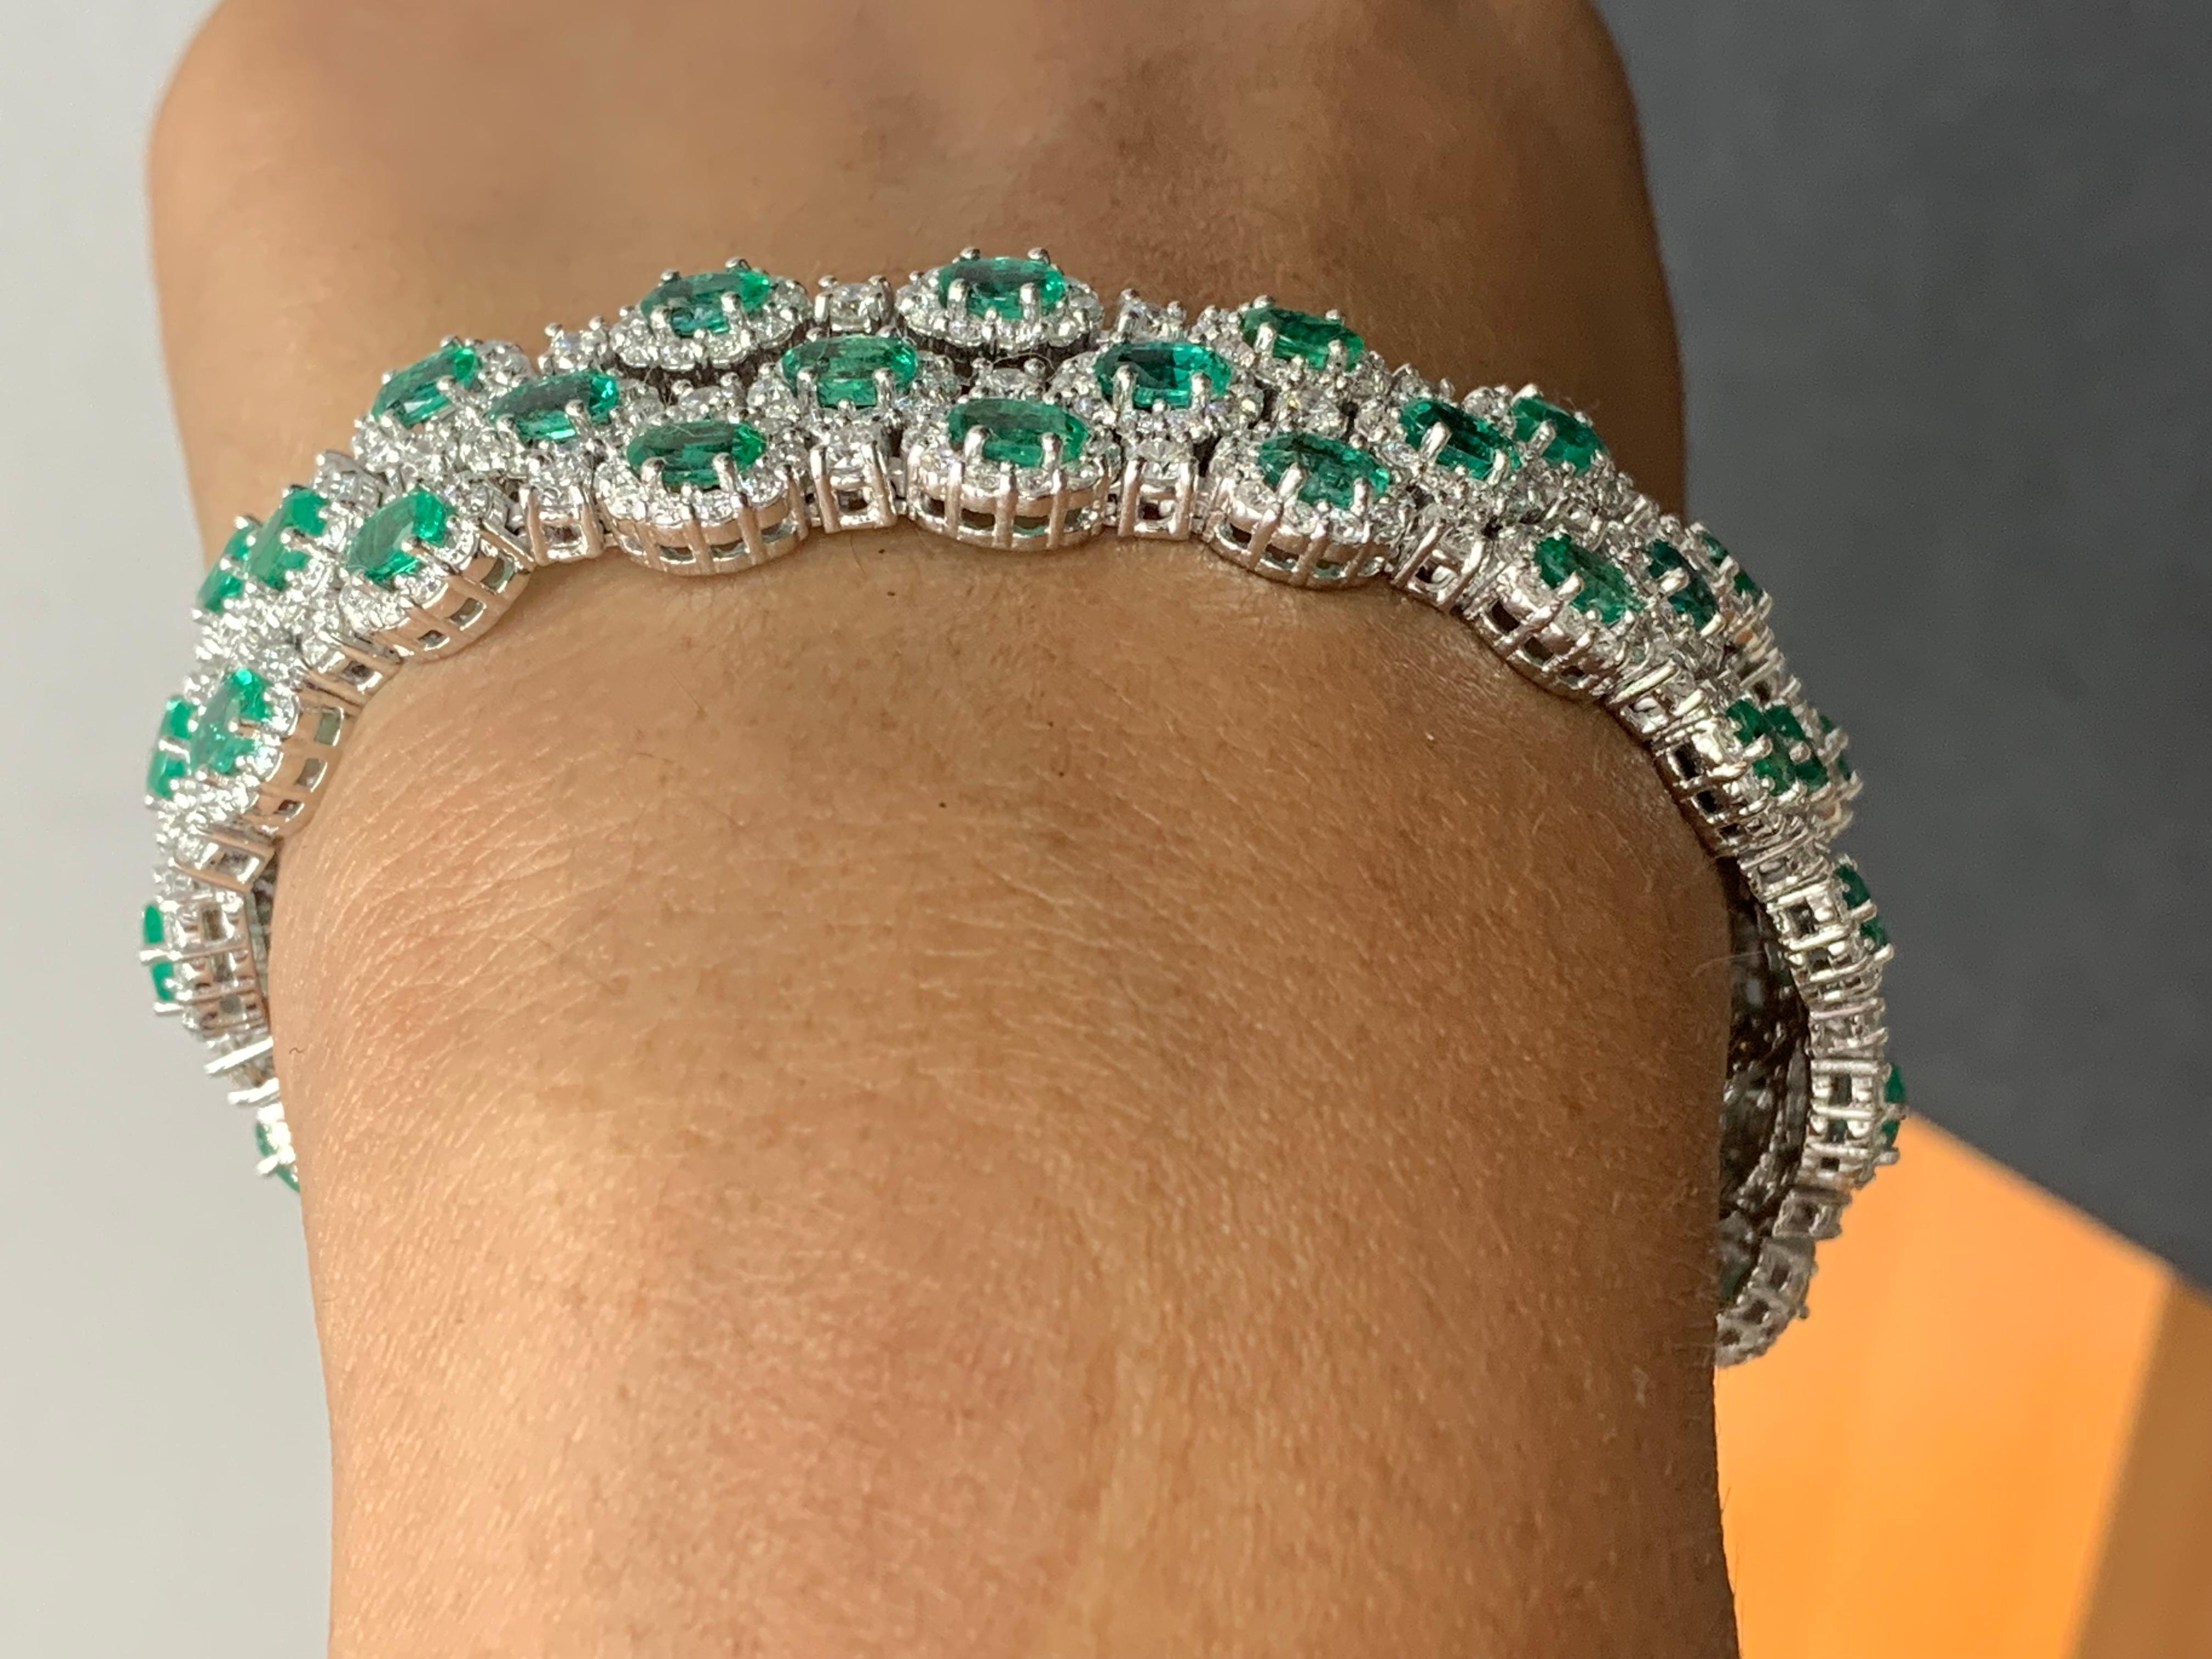 10.95 Carat Oval Cut Emerald and Diamond 3 Row Bracelet in 14K White Gold For Sale 1